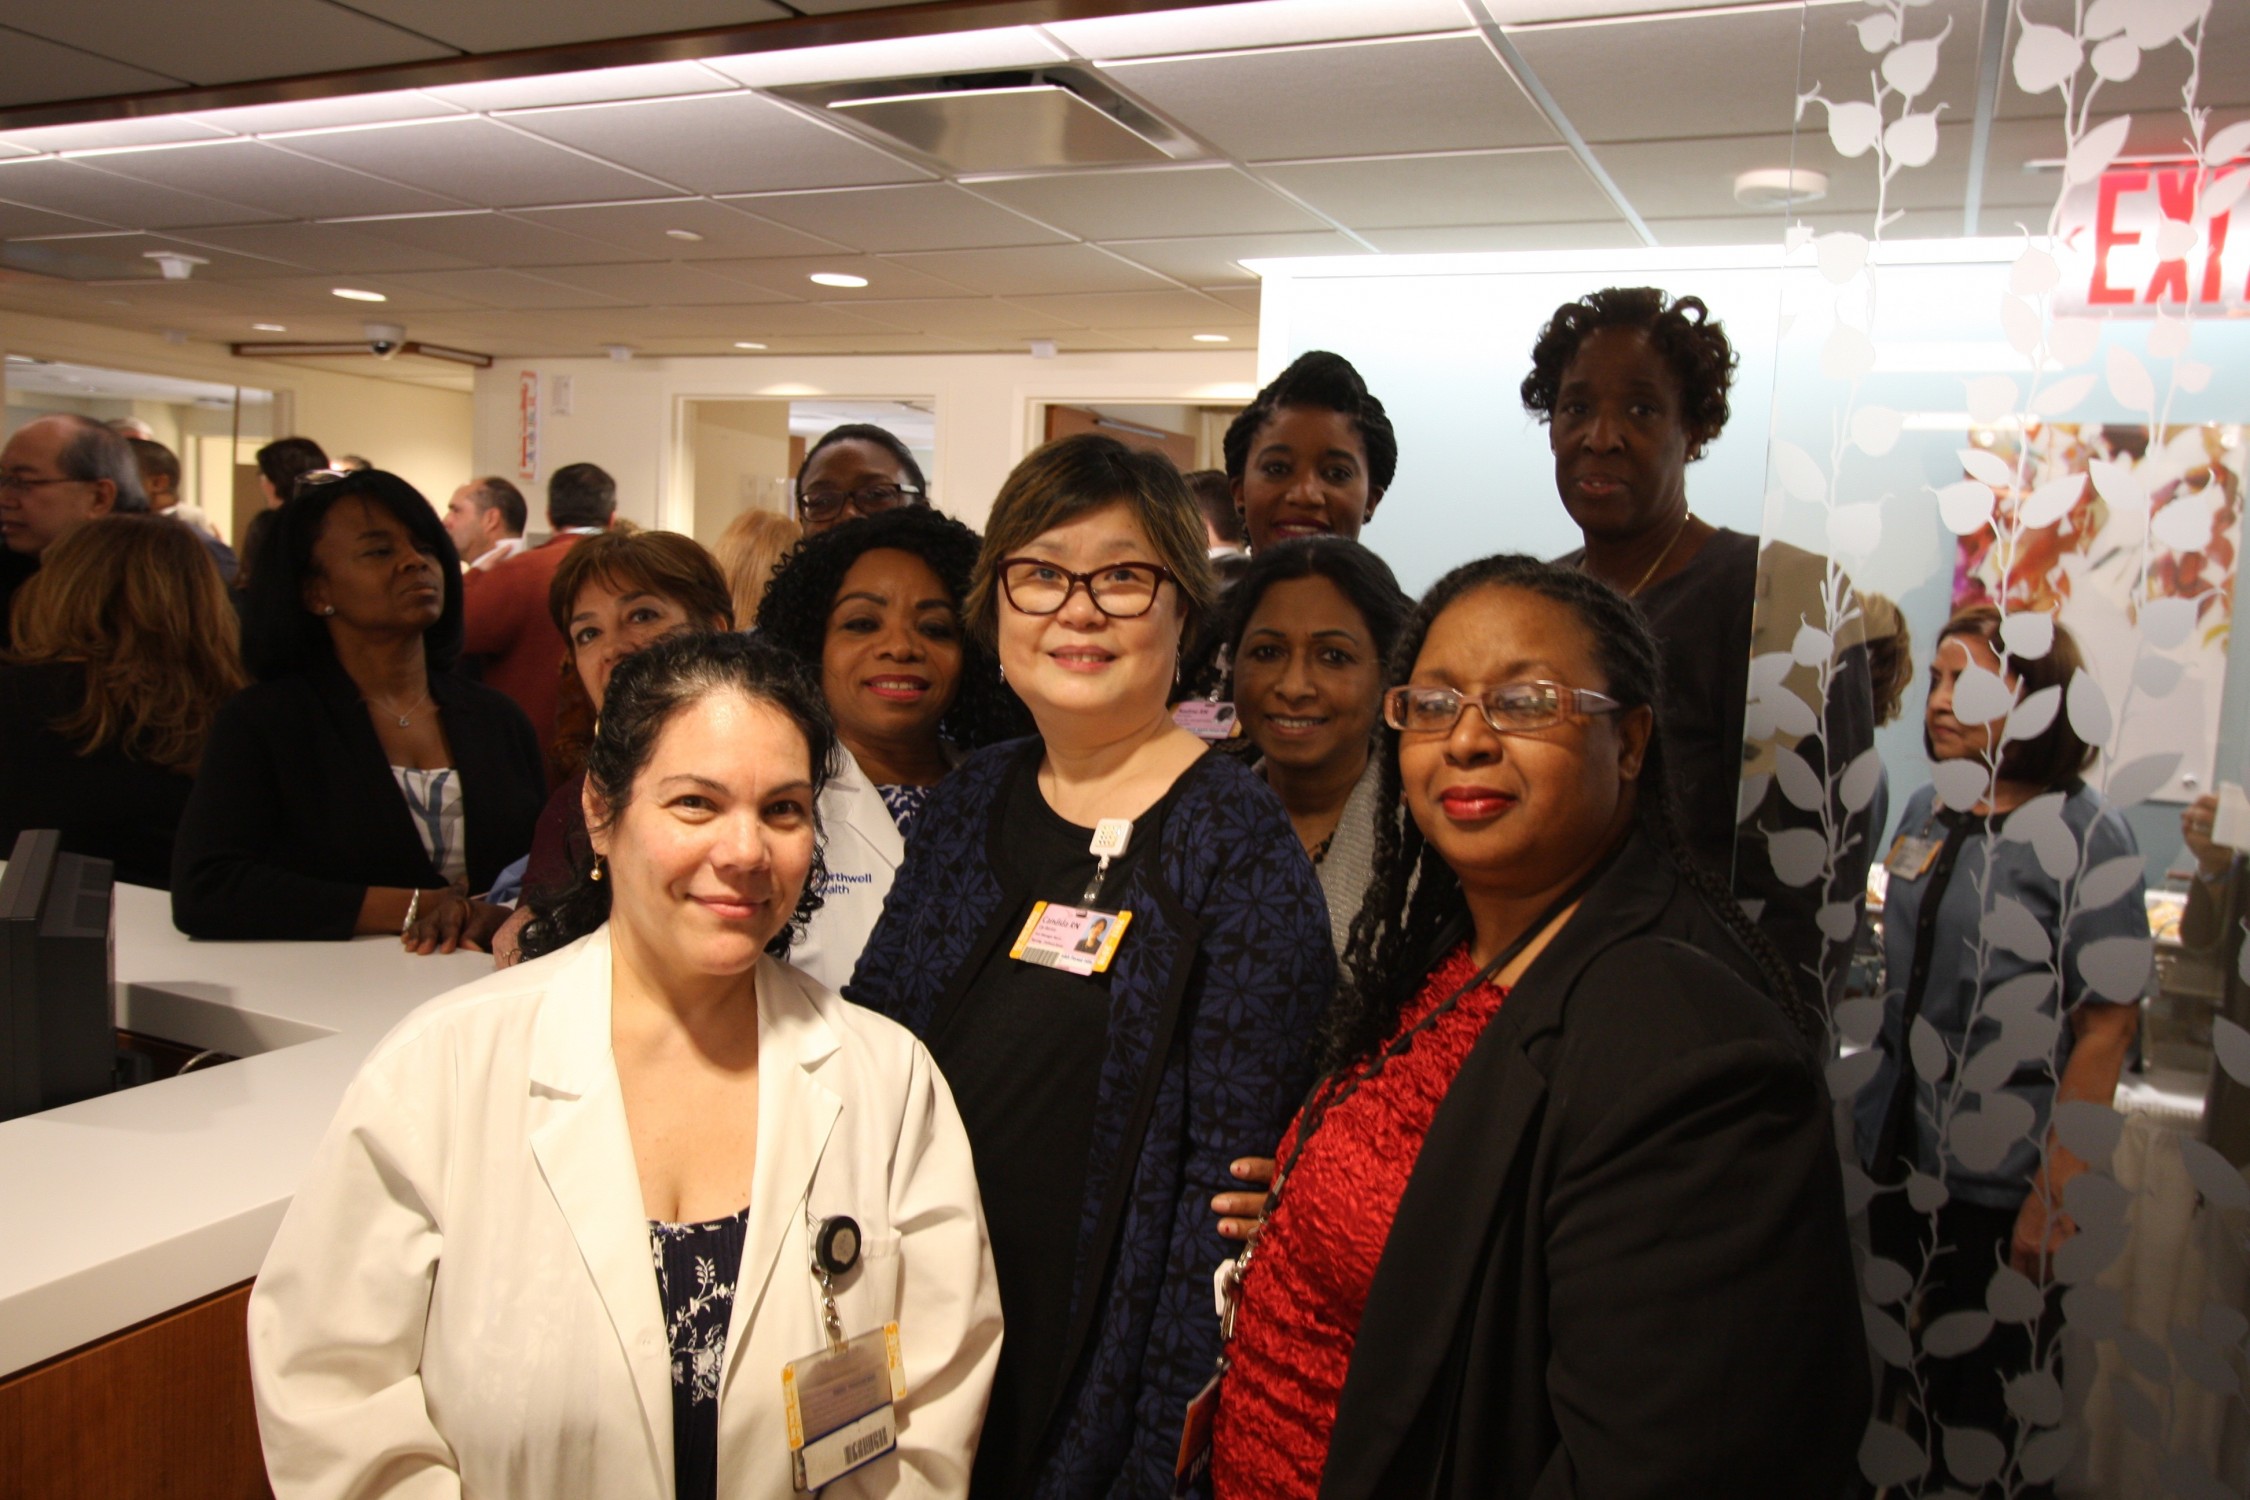 All smiles from the staff at Long Island Jewish Forest hills Post-Partum Unit Ribbon Cutting as staffers celebrate the opening 